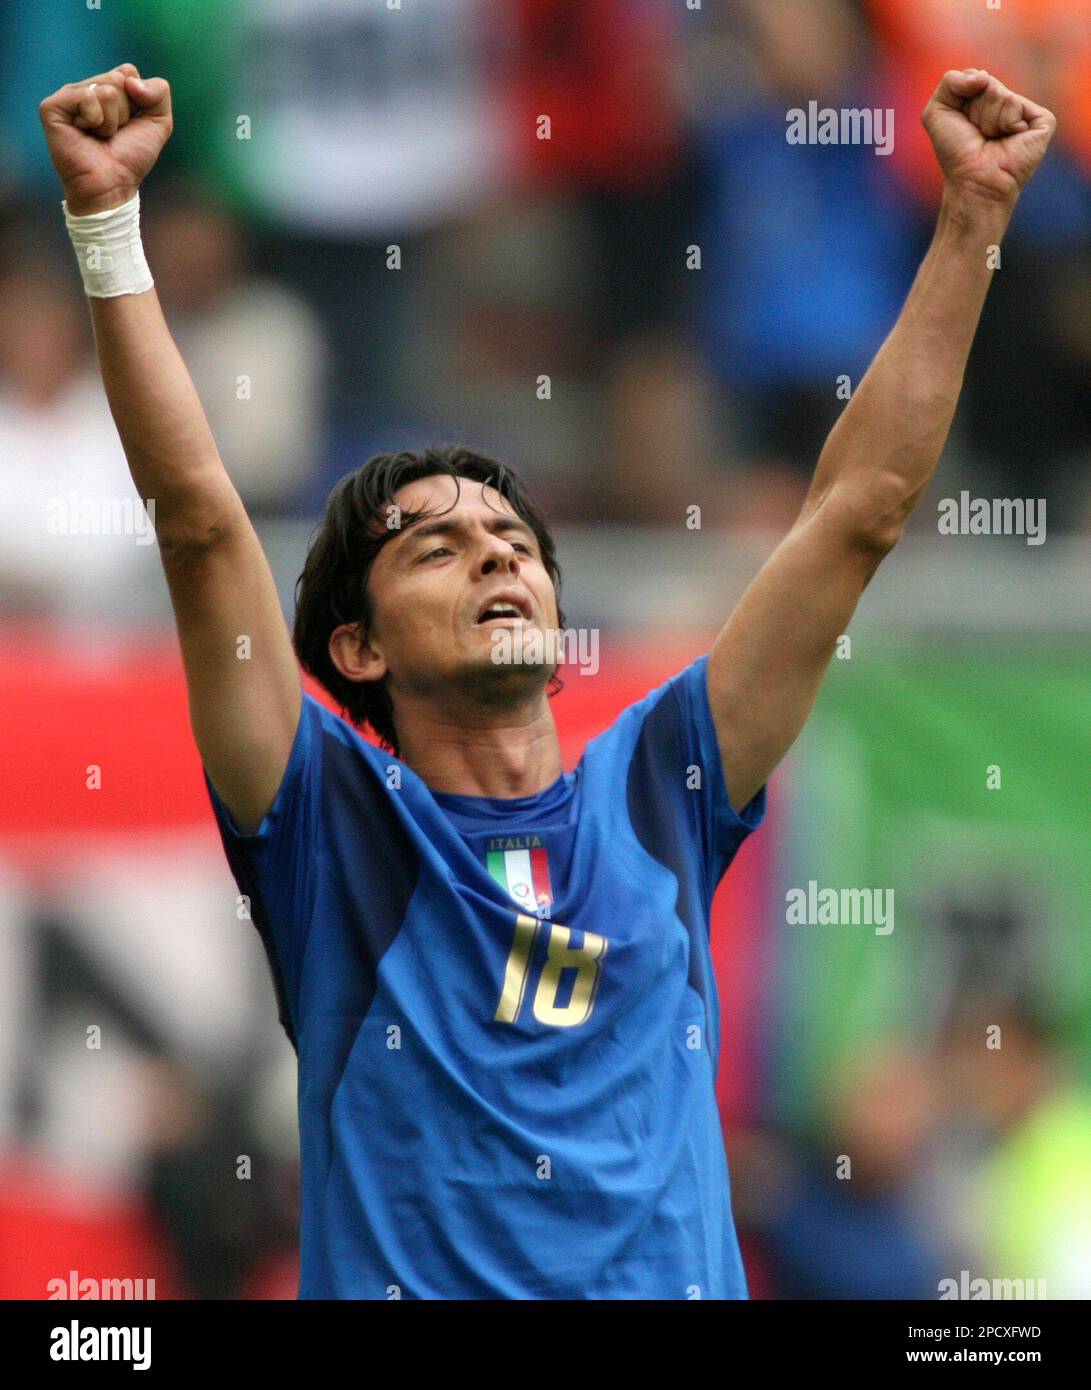 Italy's Filippo Inzaghi (18) celebrates after score during the Czech  Republic v. Italy 2006 World Cup Group E soccer match at the World Cup  stadium, Thursday, June 22, 2006, in Hamburg, Germany.